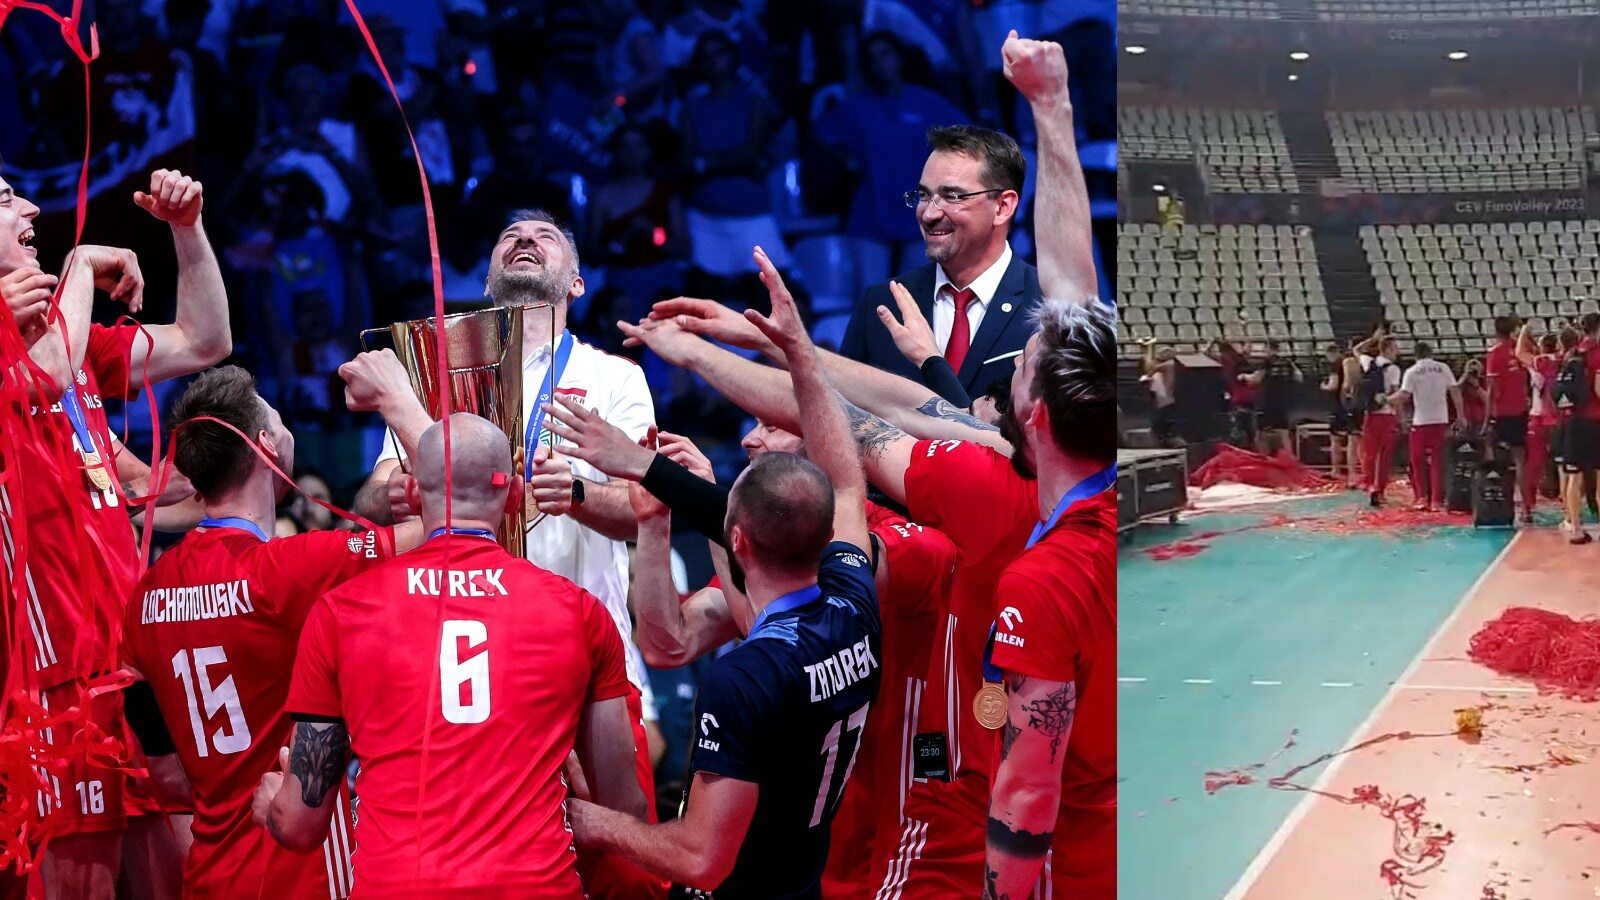 The volleyball train is going to Poland.  The European champions celebrate in style